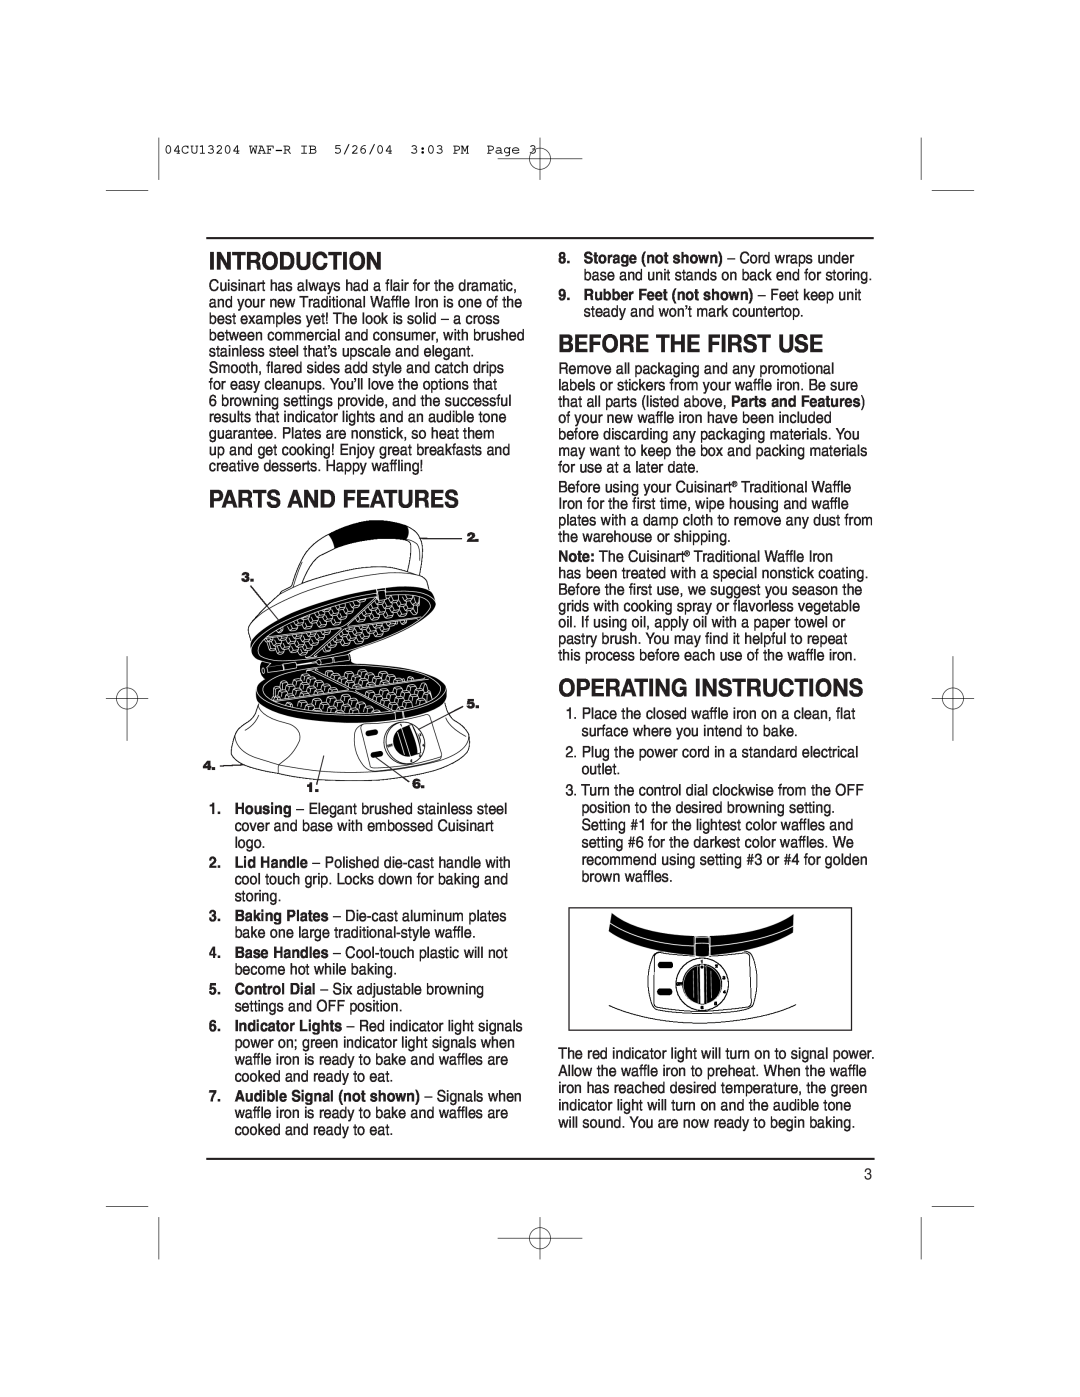 Cuisinart WAF-R manual Introduction, Parts And Features, Before The First Use, Operating Instructions 